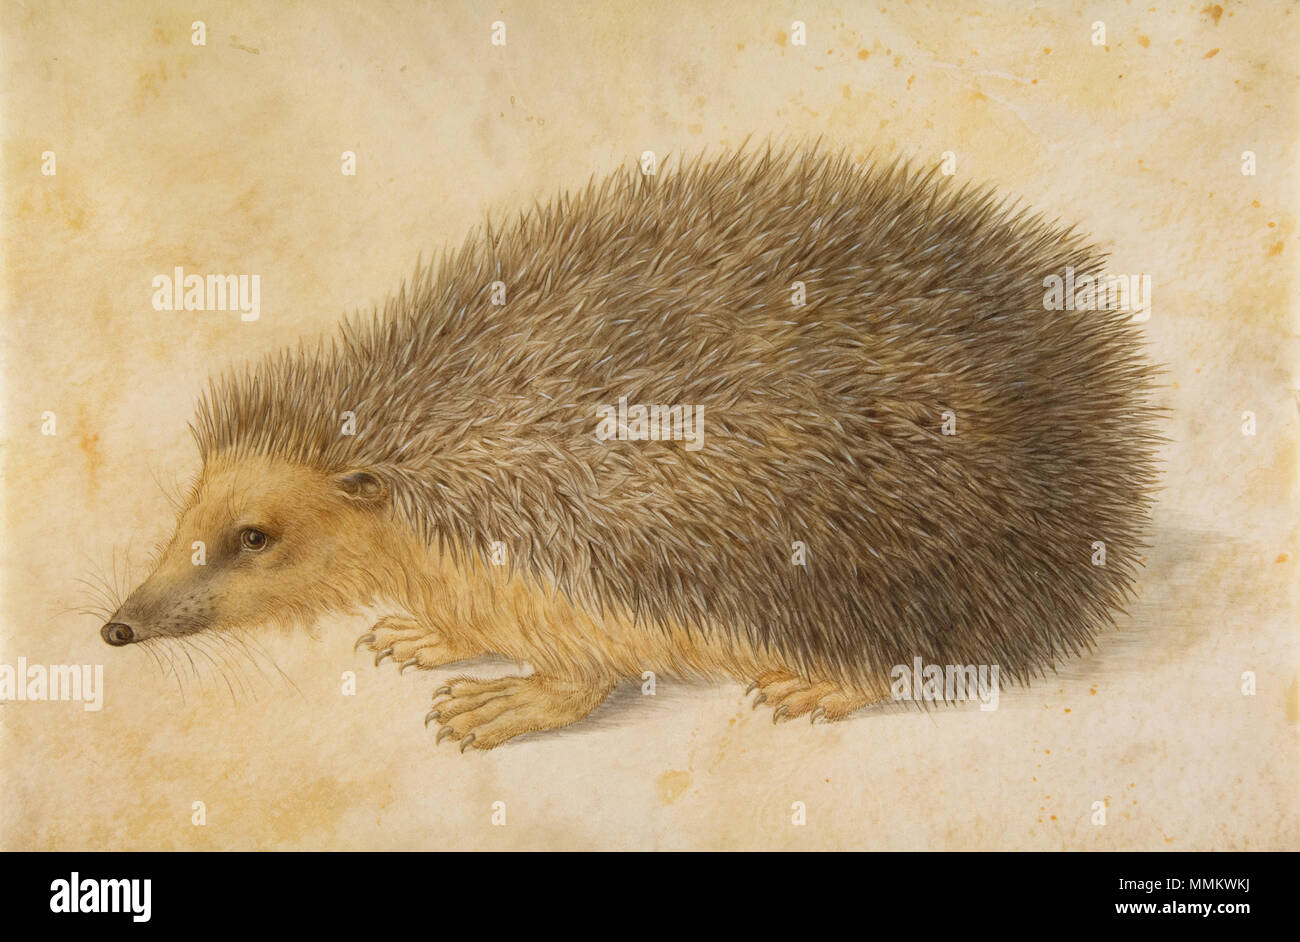 .  English: Hans Hoffmann, A Hedgehog (before 1584). Watercolor and gouache on parchment. 7 7/8 x 11 3/4 in. (20 x 29.8 cm). The Metropolitan Museum of Art. Purchase, Annette de la Renta Gift, 2005 (2005.347). Information from the Metropolitan  . 22 May 2012, 11:42:54. Hans Hoffmann - Hedgehog Stock Photo